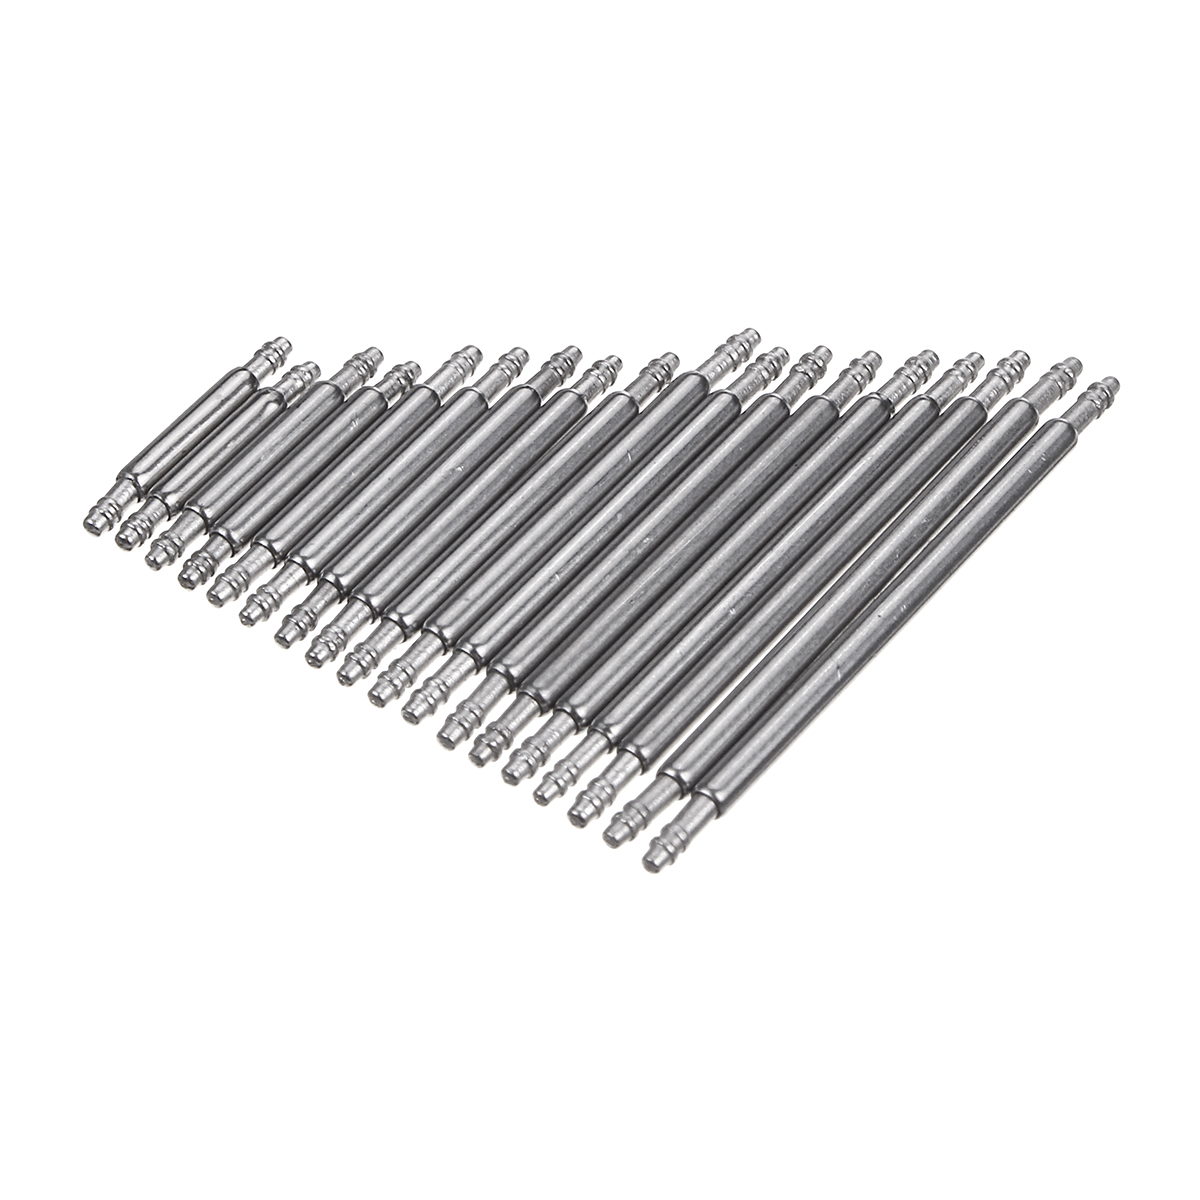 360Pcs-Stainless-Steel-8-25mm-Watch-Band-Strap-Spring-Bars-Link-Pins-Watch-Repair-Set-1558230-5